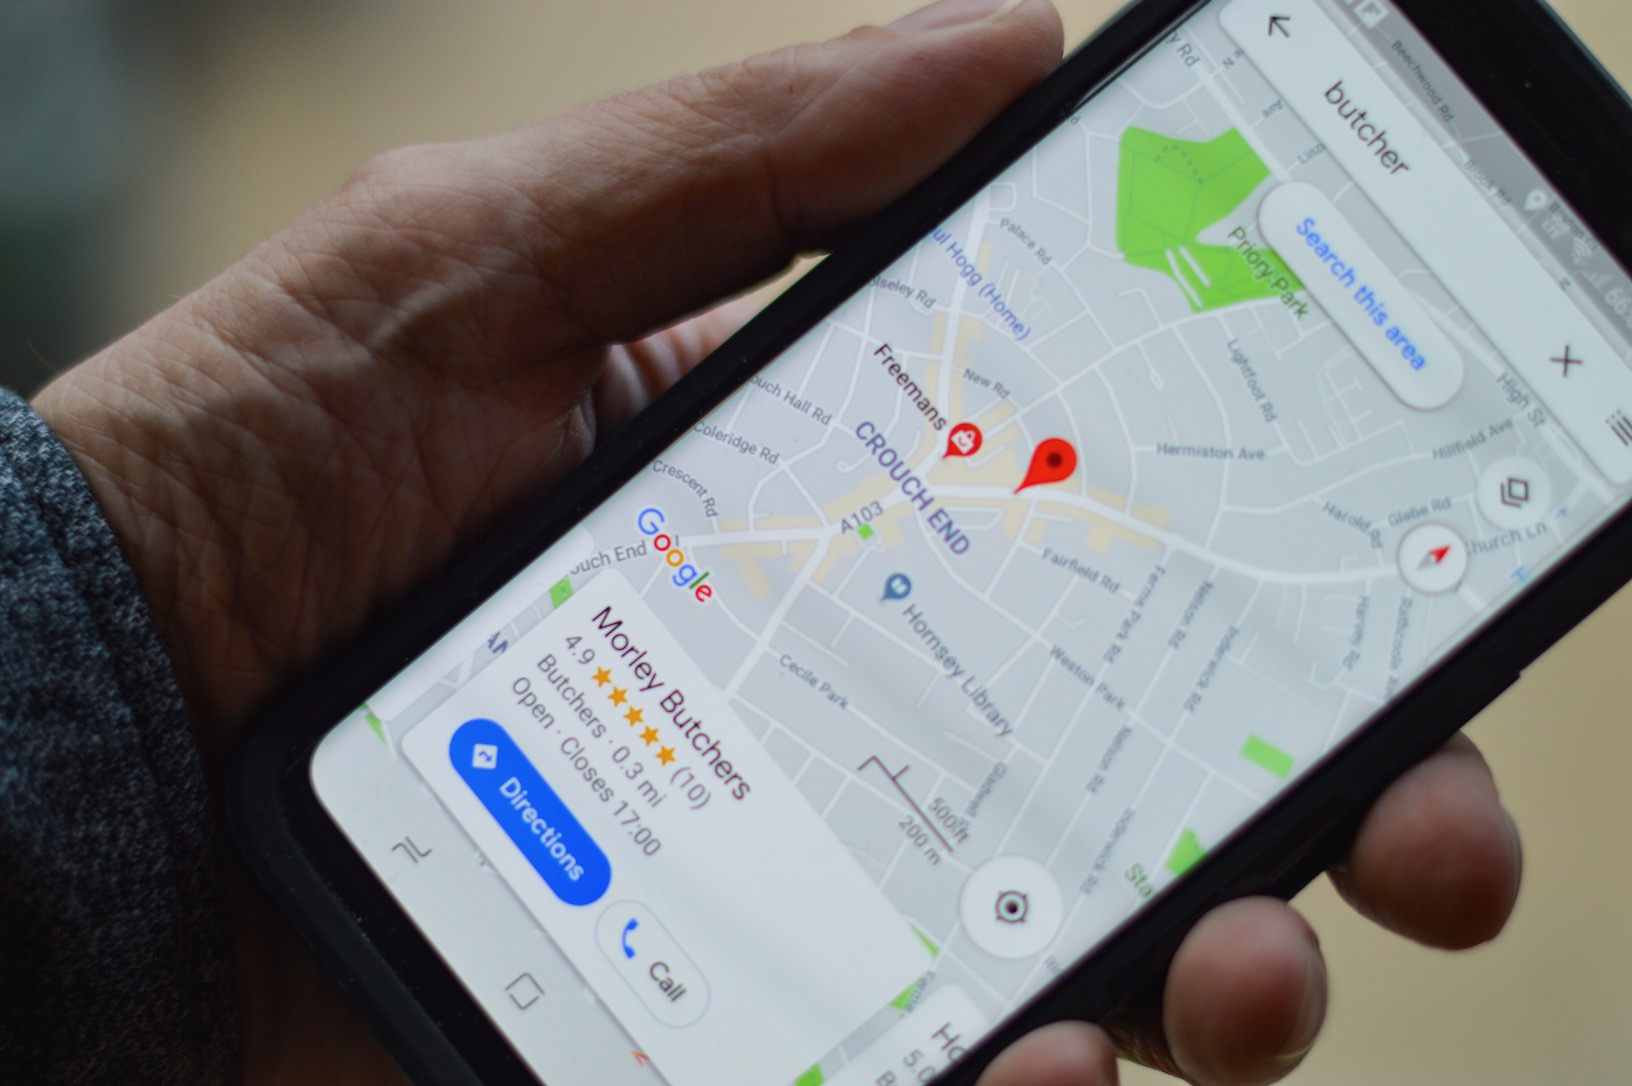 How to Track and Locate Lost Android Phone from iPhone for Free - Tech Guide